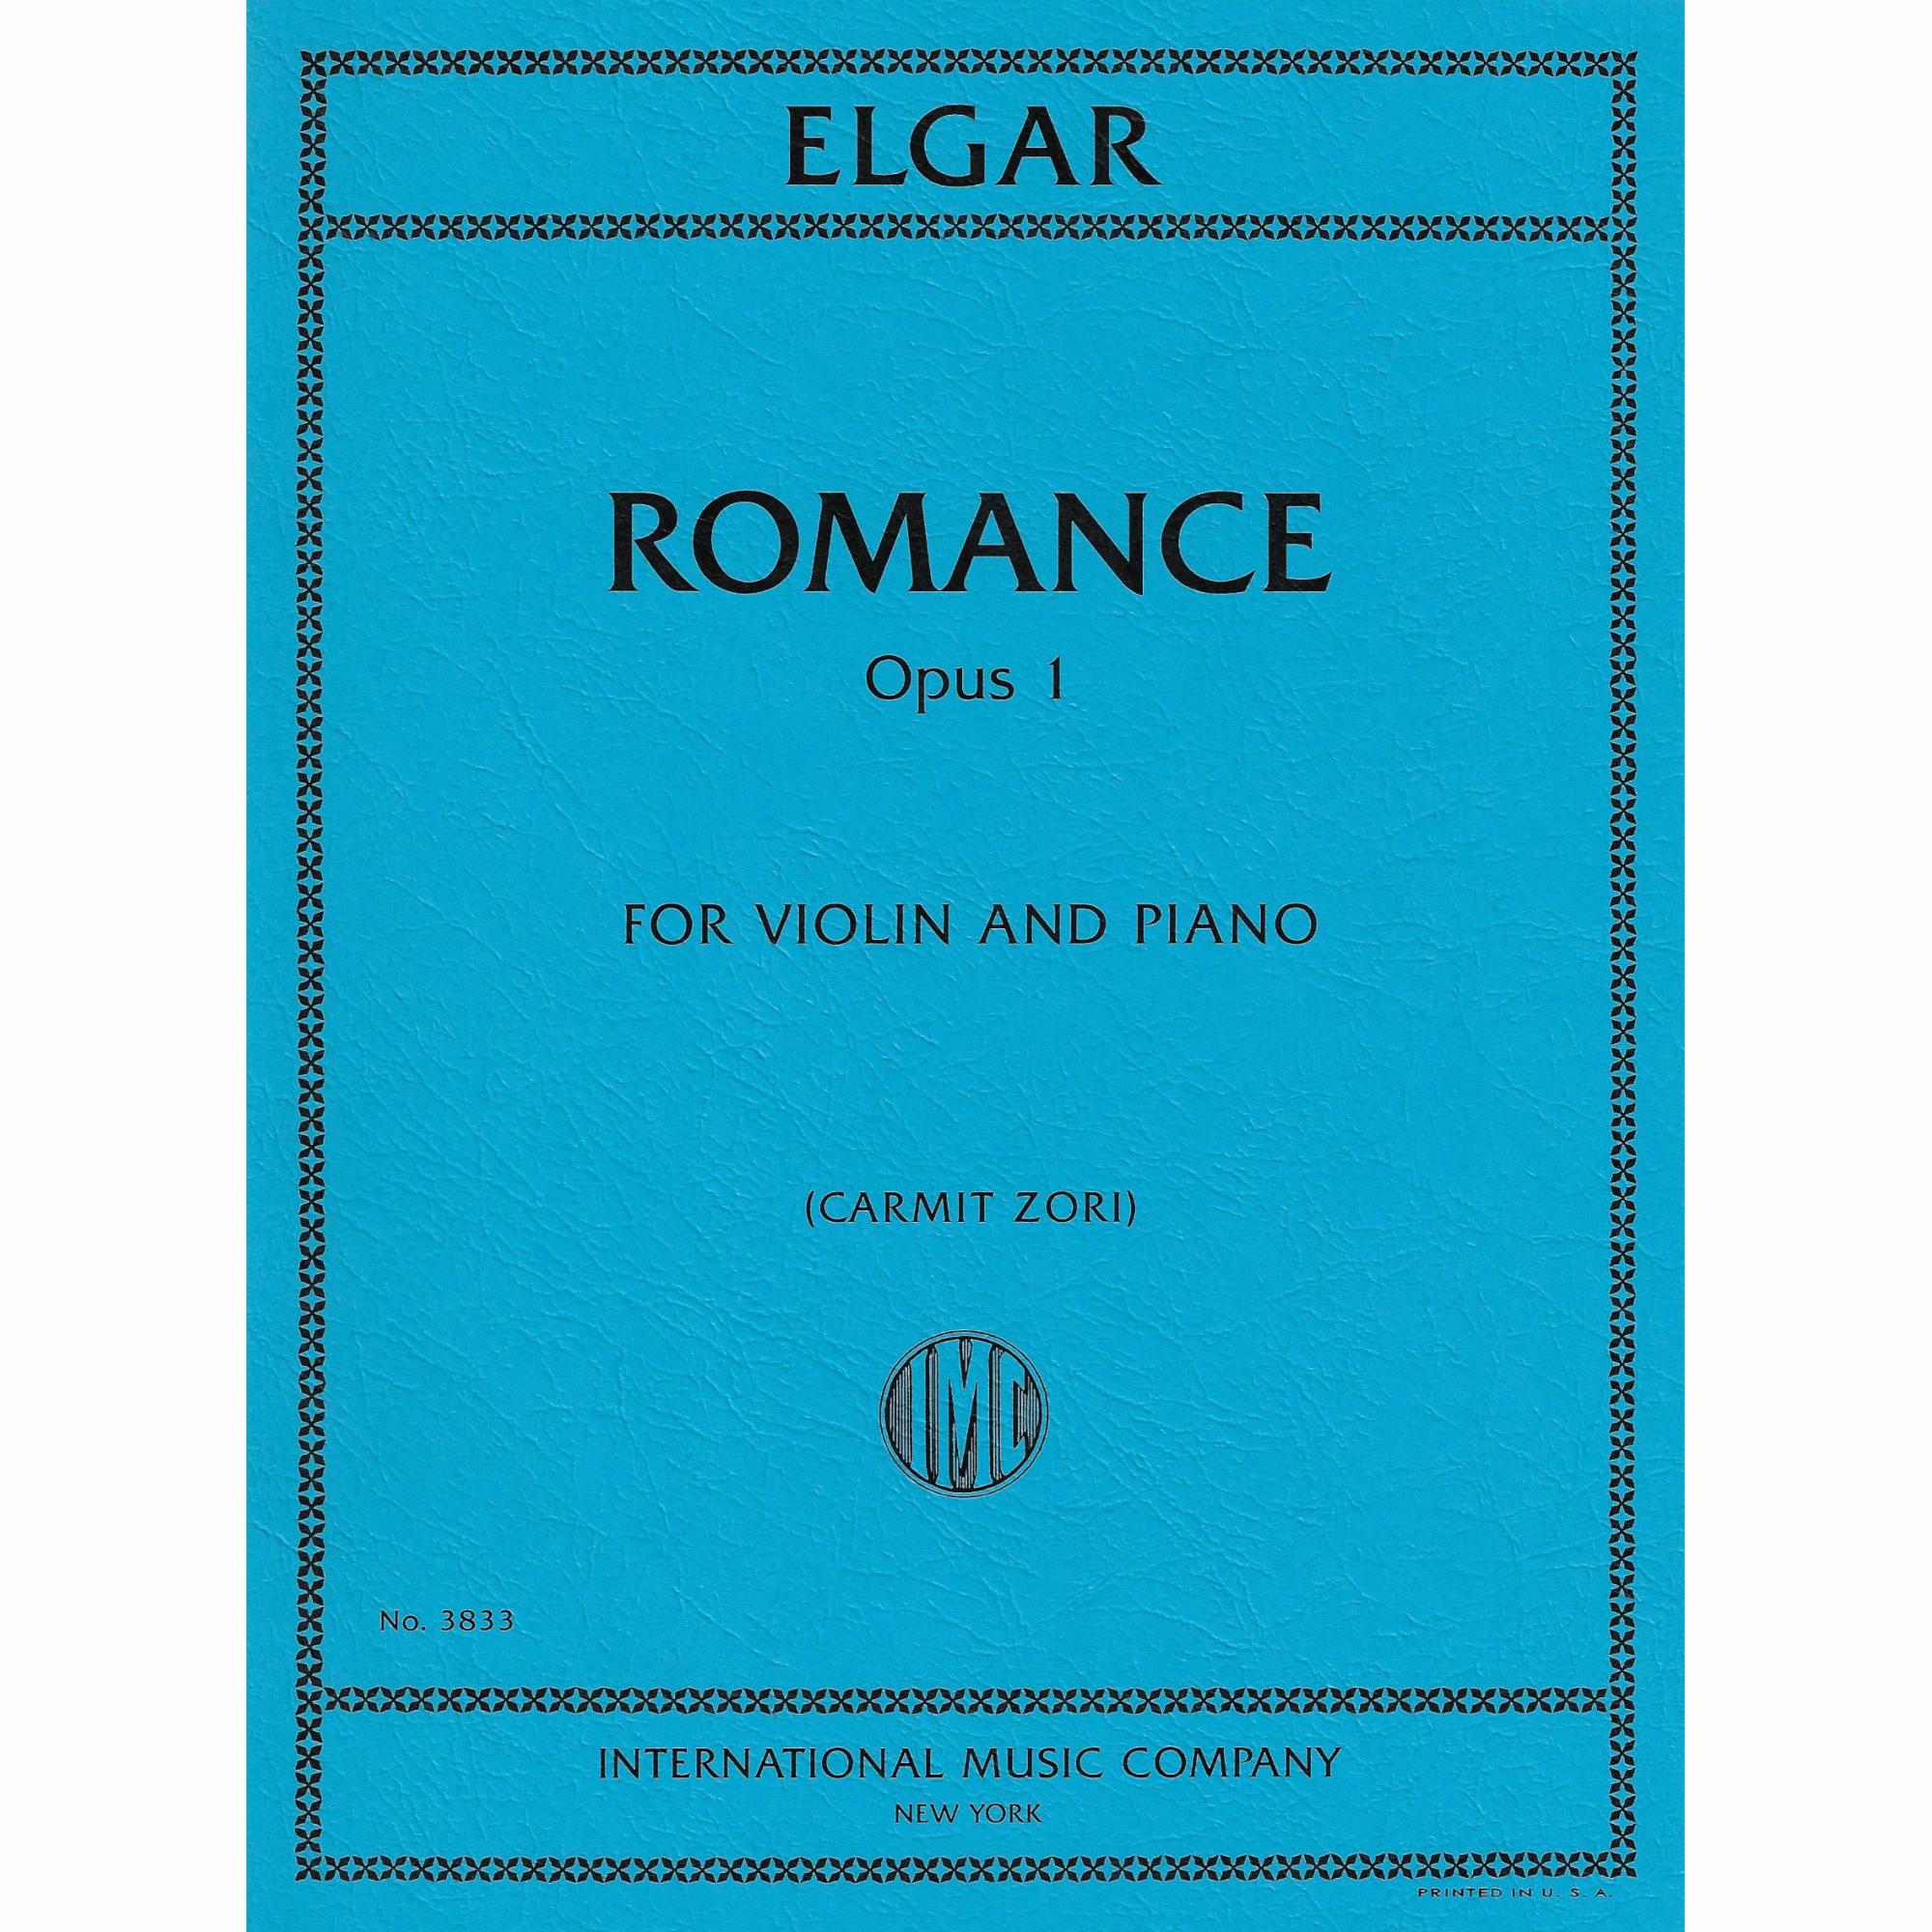 Elgar -- Romance, Op. 1 for Violin and Piano